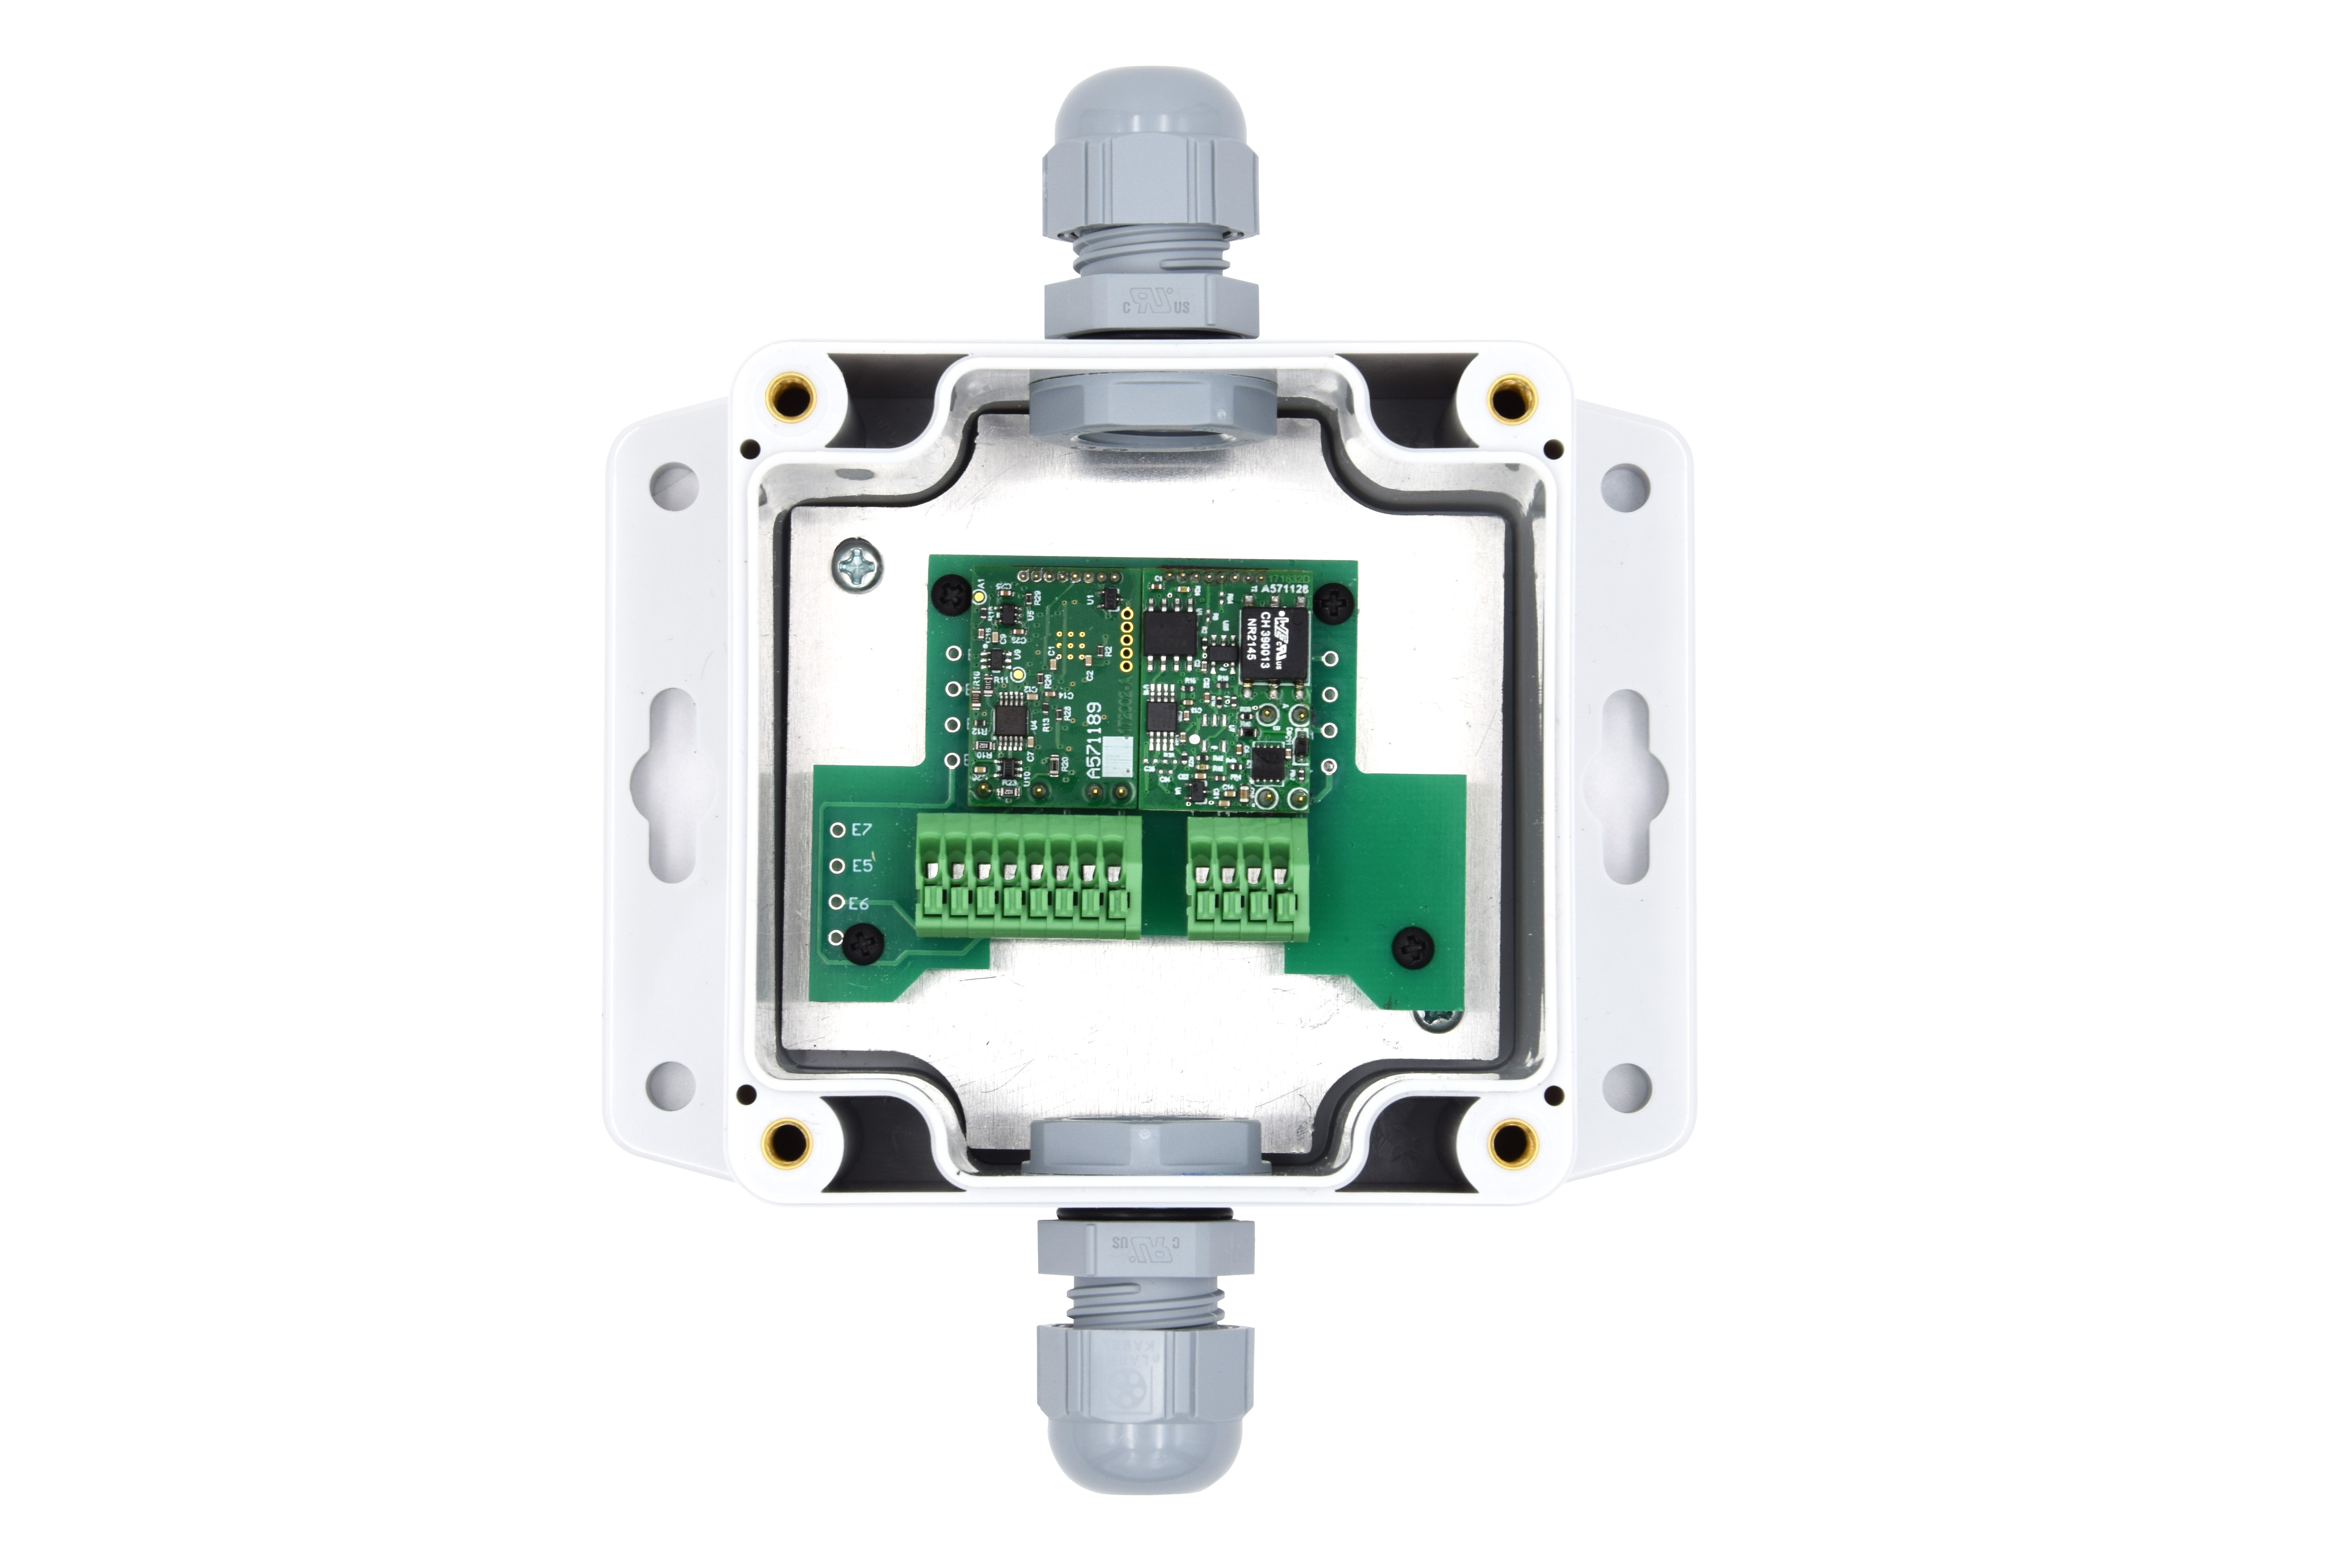 NeoTec signal converter 4-20 mA (conductivity, cell constant c=1.0) in enclosure (wall mounting)